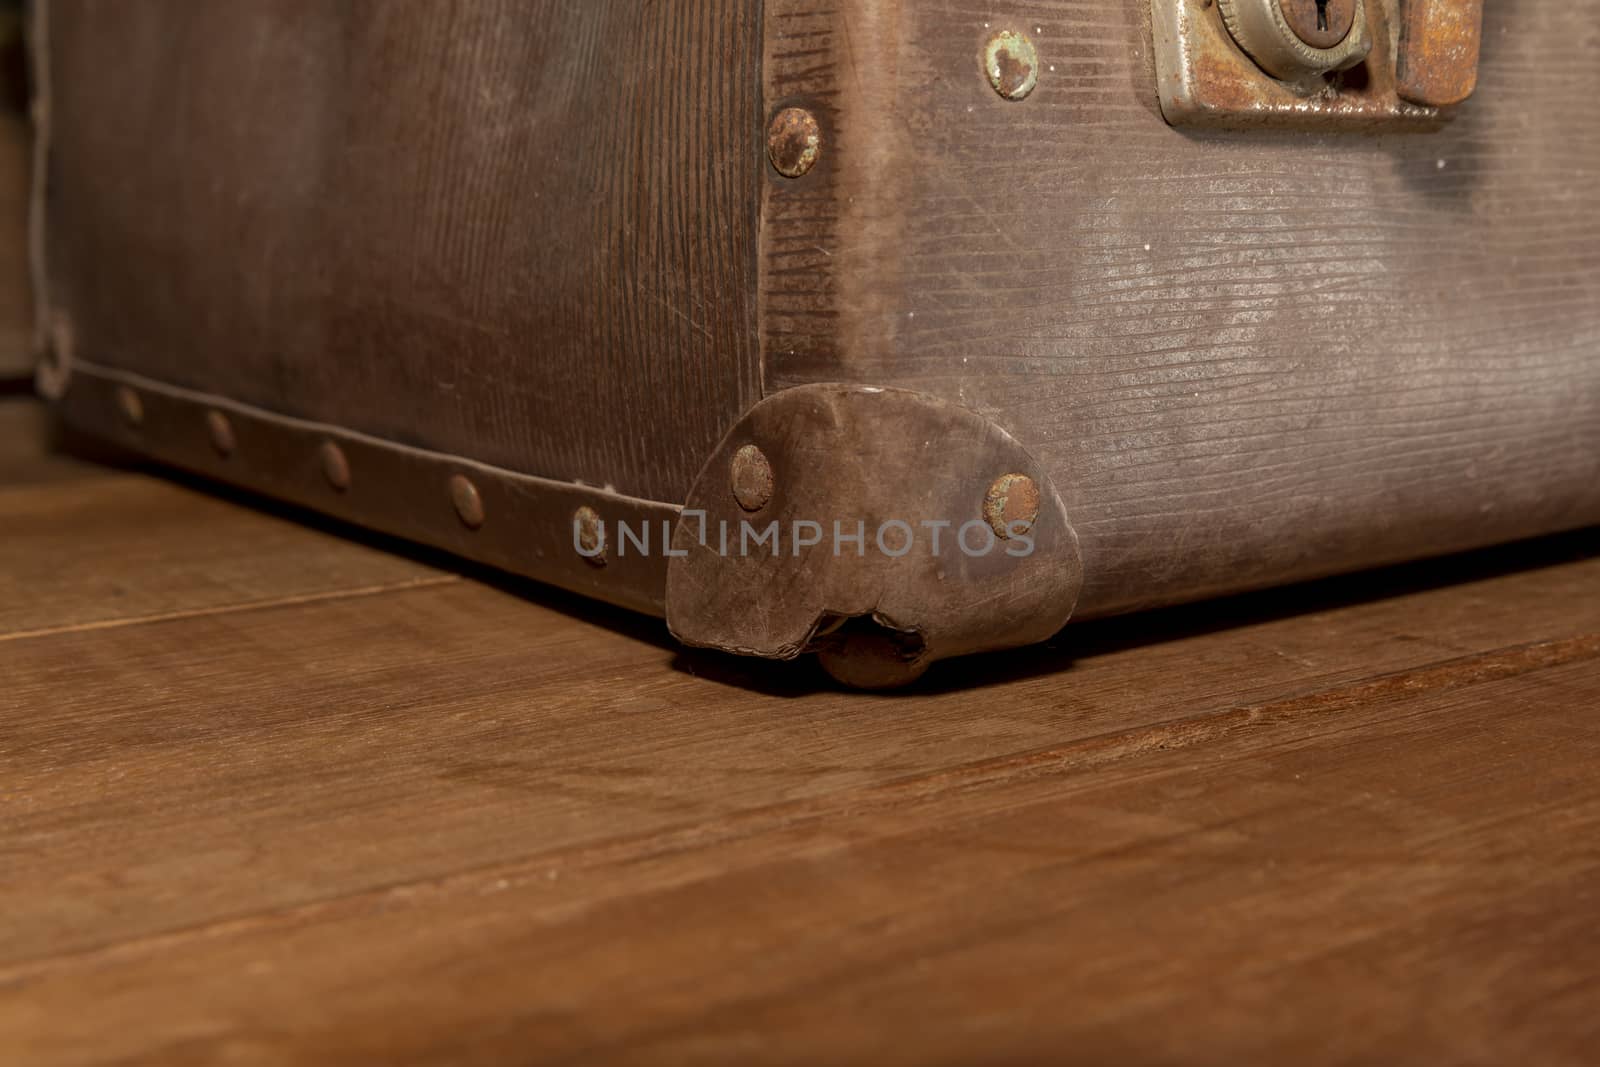 A damaged corner protector on an old brown leather suitcase by WittkePhotos